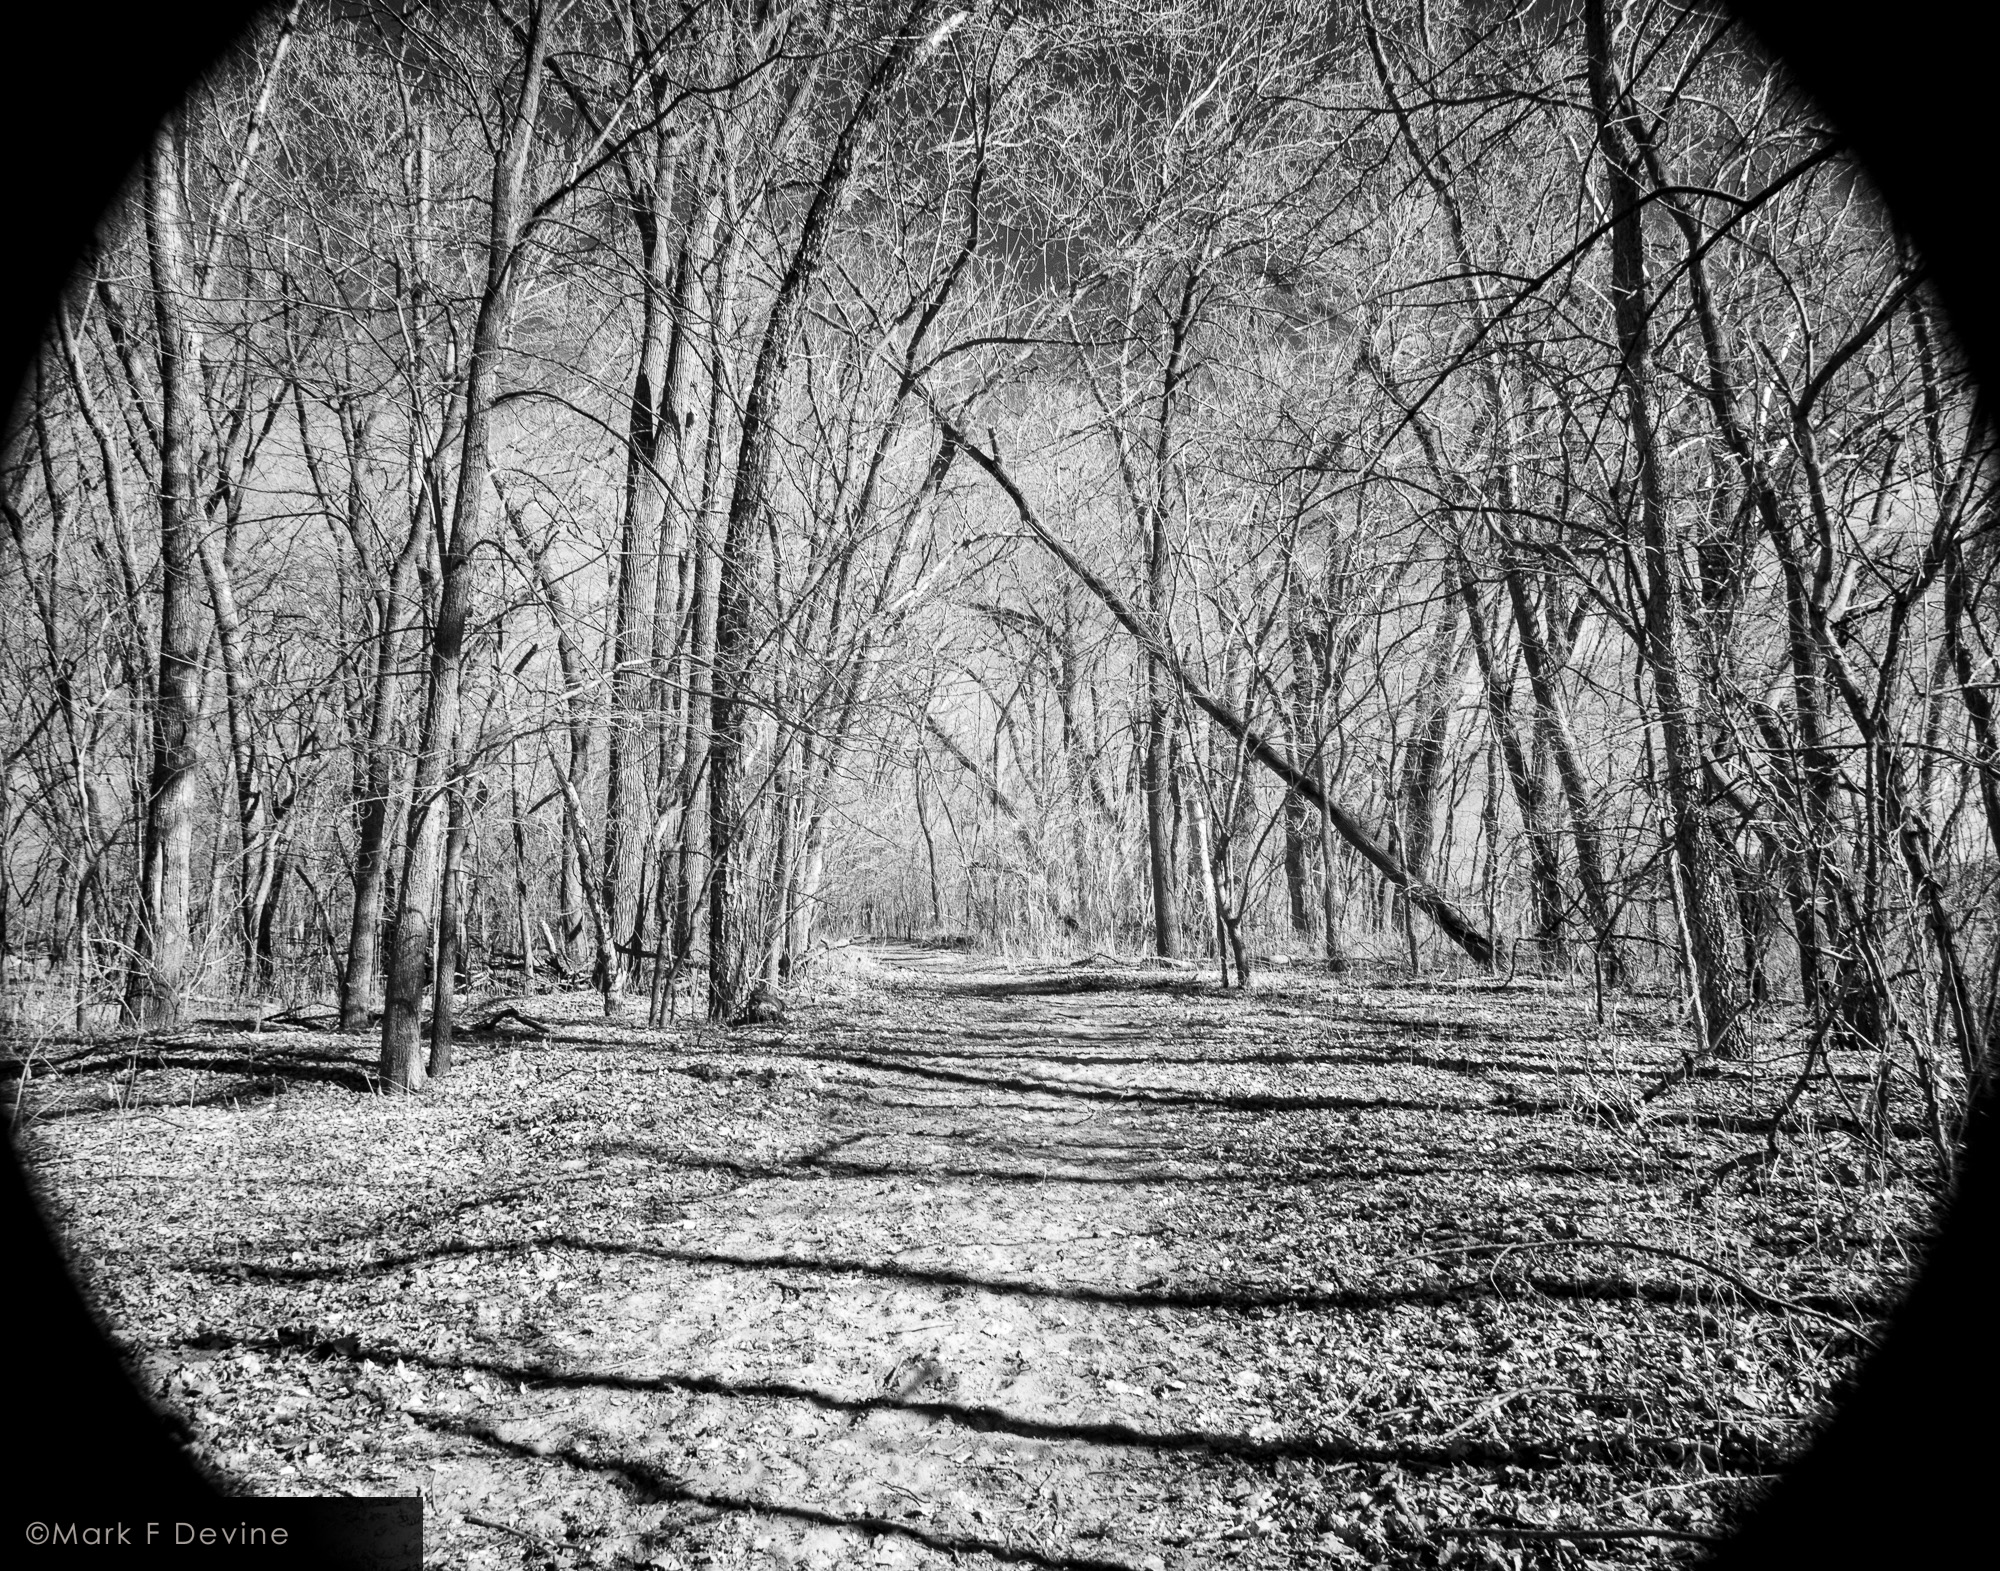 Infrared image showing late afternoon shadows on a path through the Mississippi River bottoms near Winona, Minnesota.